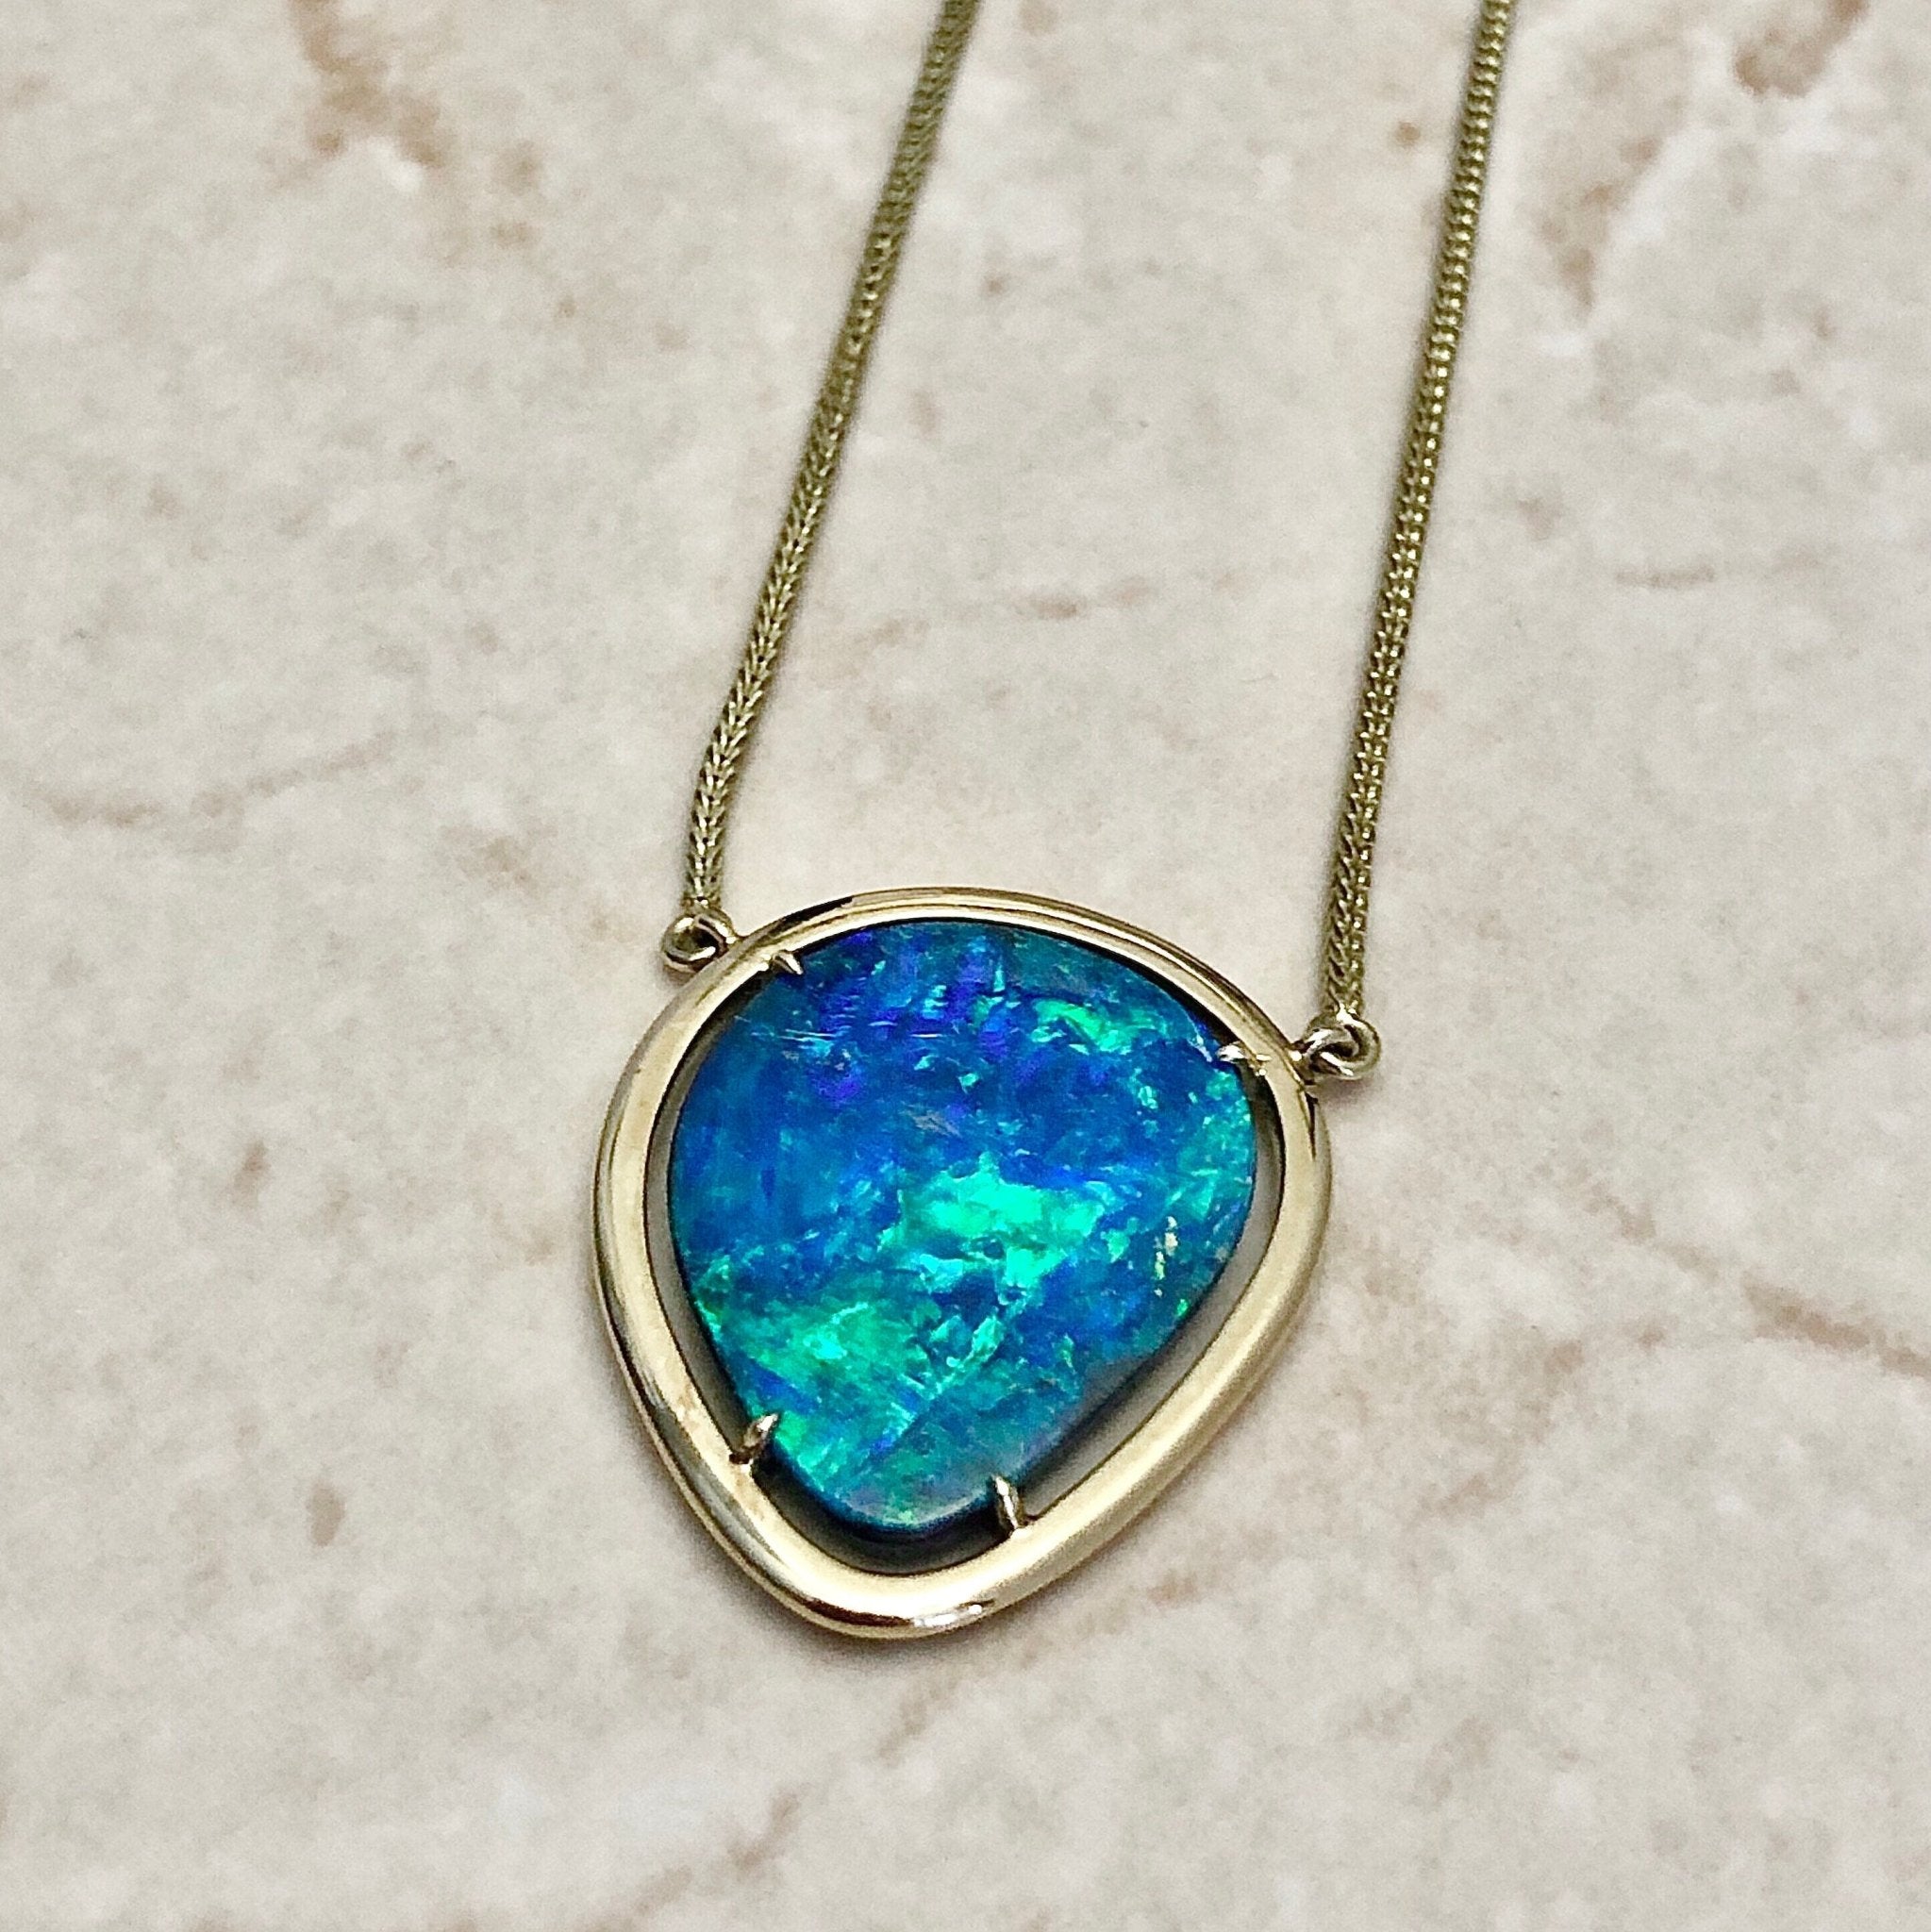 1.1ct Precious Australian Solid White/Crystal Opal pendant. 925 Sterling  Silver - Opals From Australia